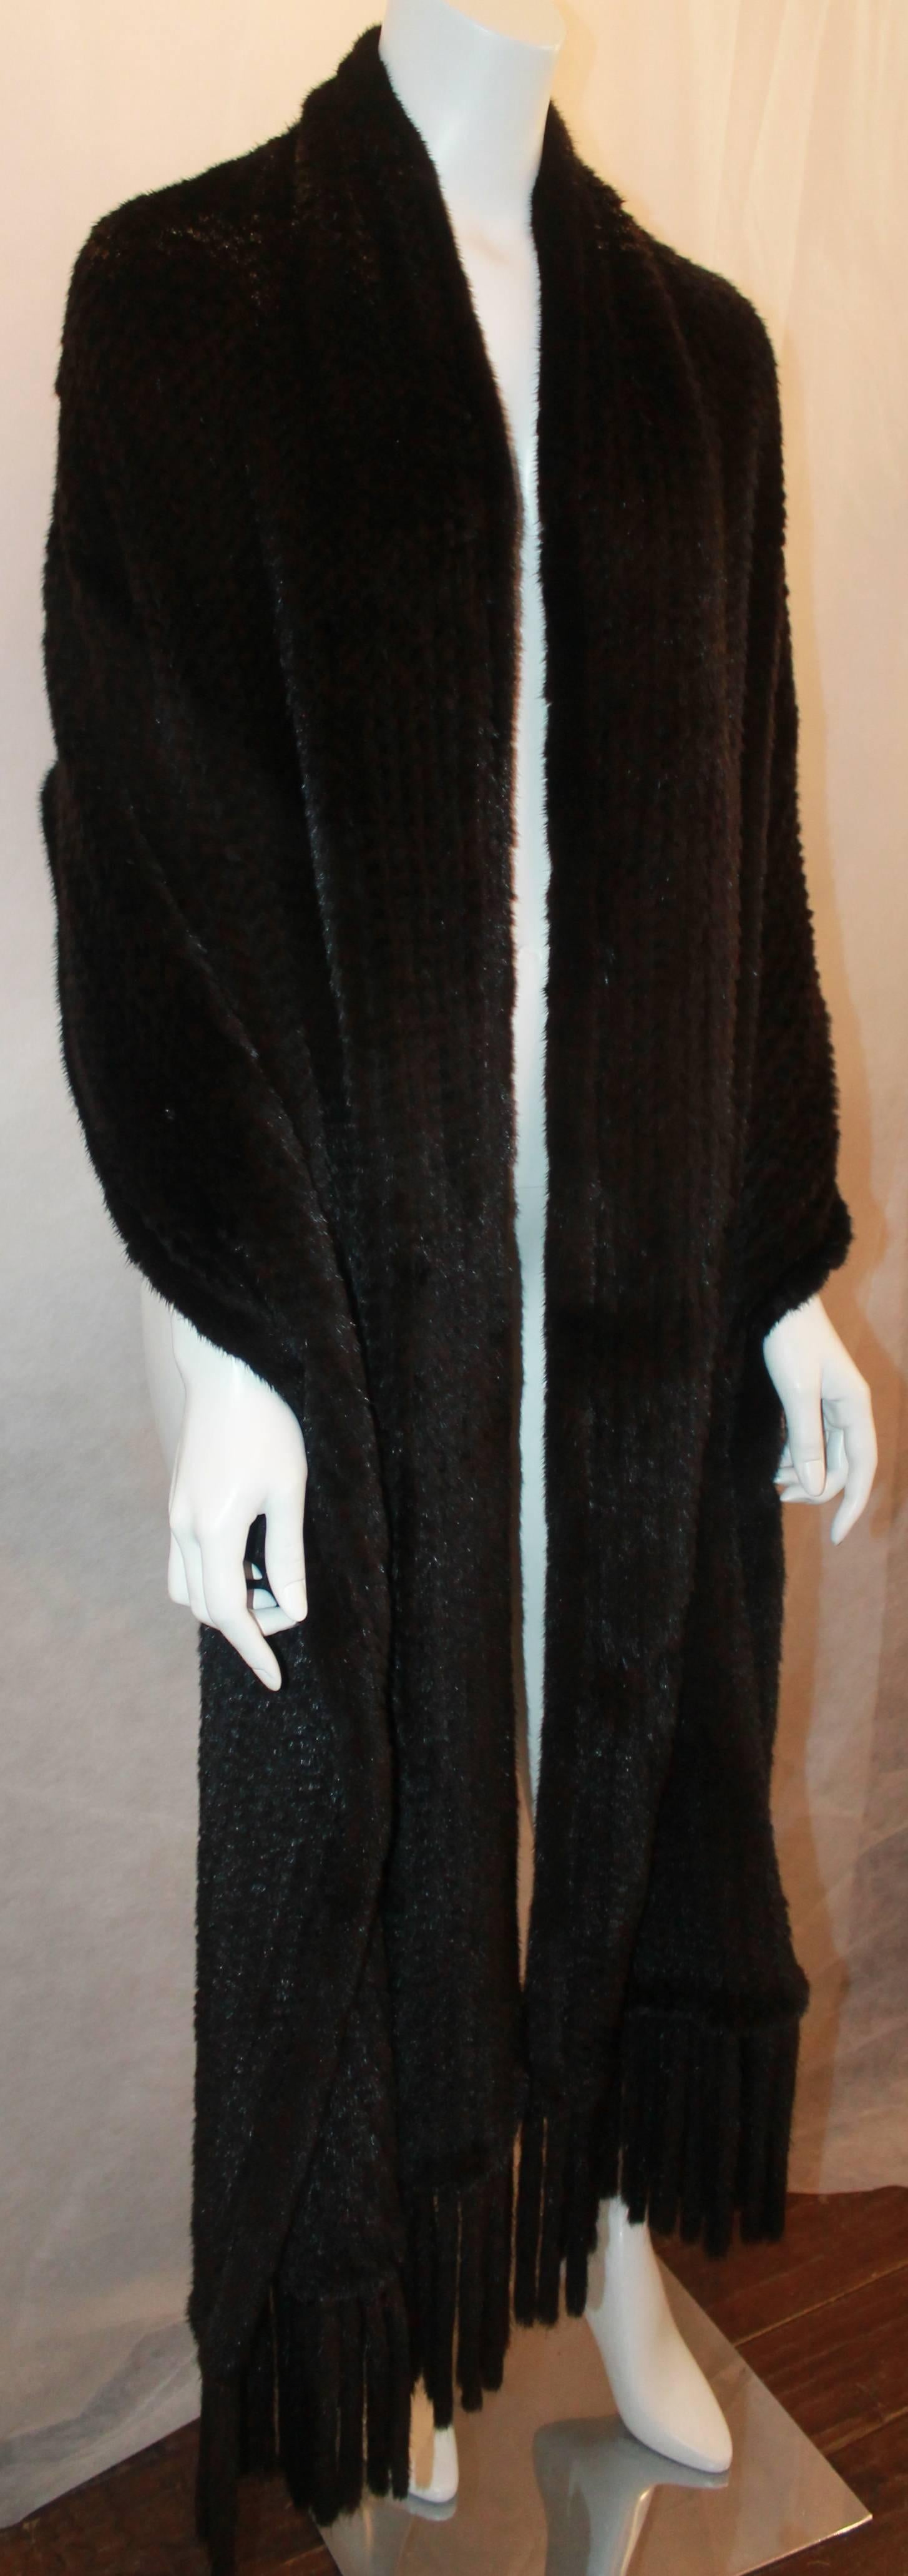 Dennis Basso Black Knitted Mink Stole w/ Tassels.  This beautiful stole is in excellent condition.  It is very long and versatile as to how you wear it.  It features a gorgeous, soft knitted mink.

Measurements:
Width: 22